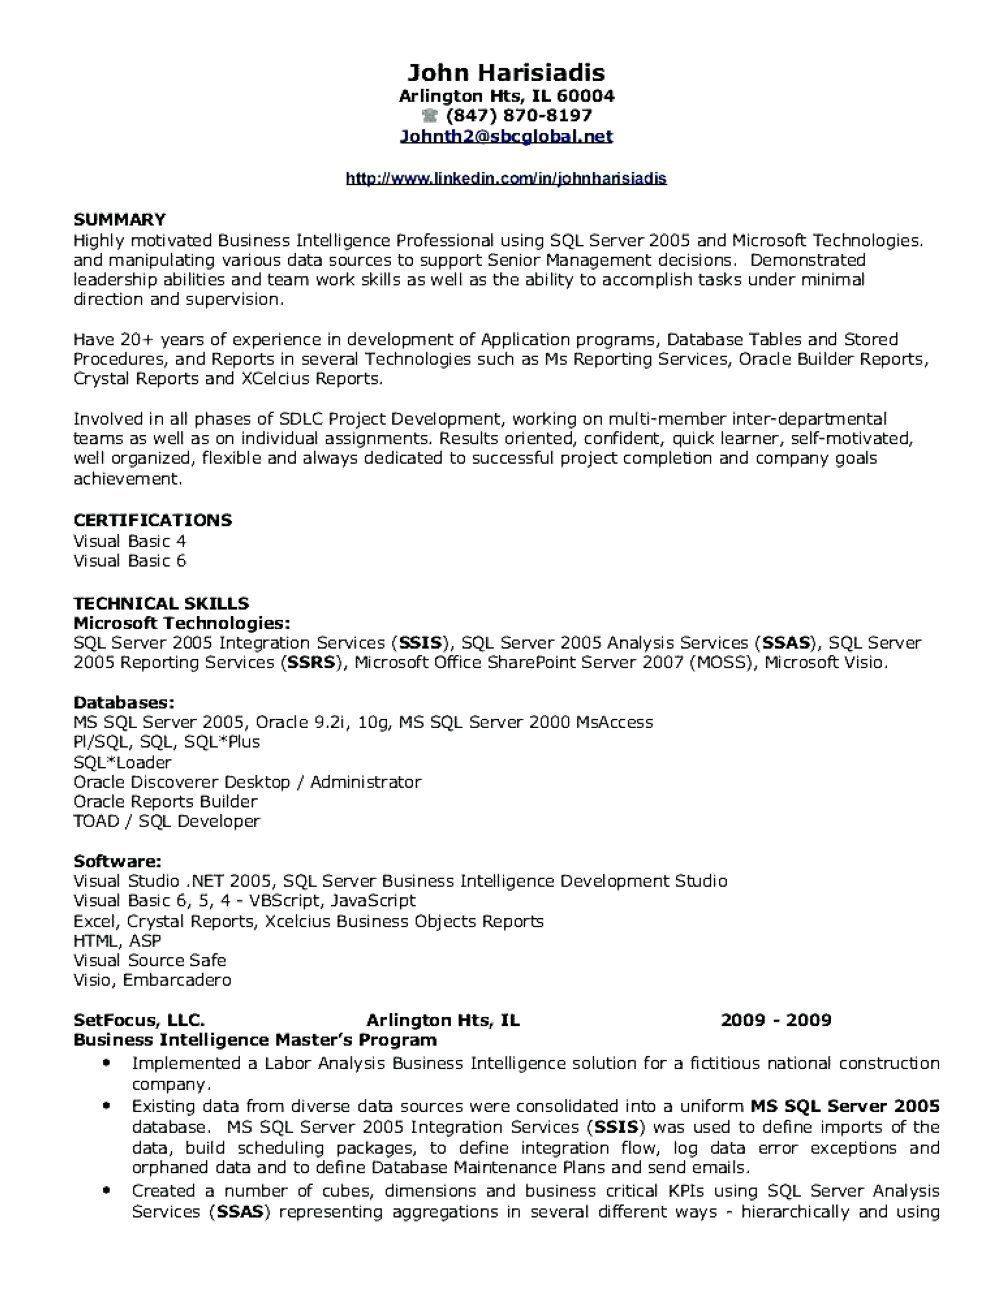 Sample Resume for 2 Years Experience In Sql Resume for 2 Years Experience Unique System